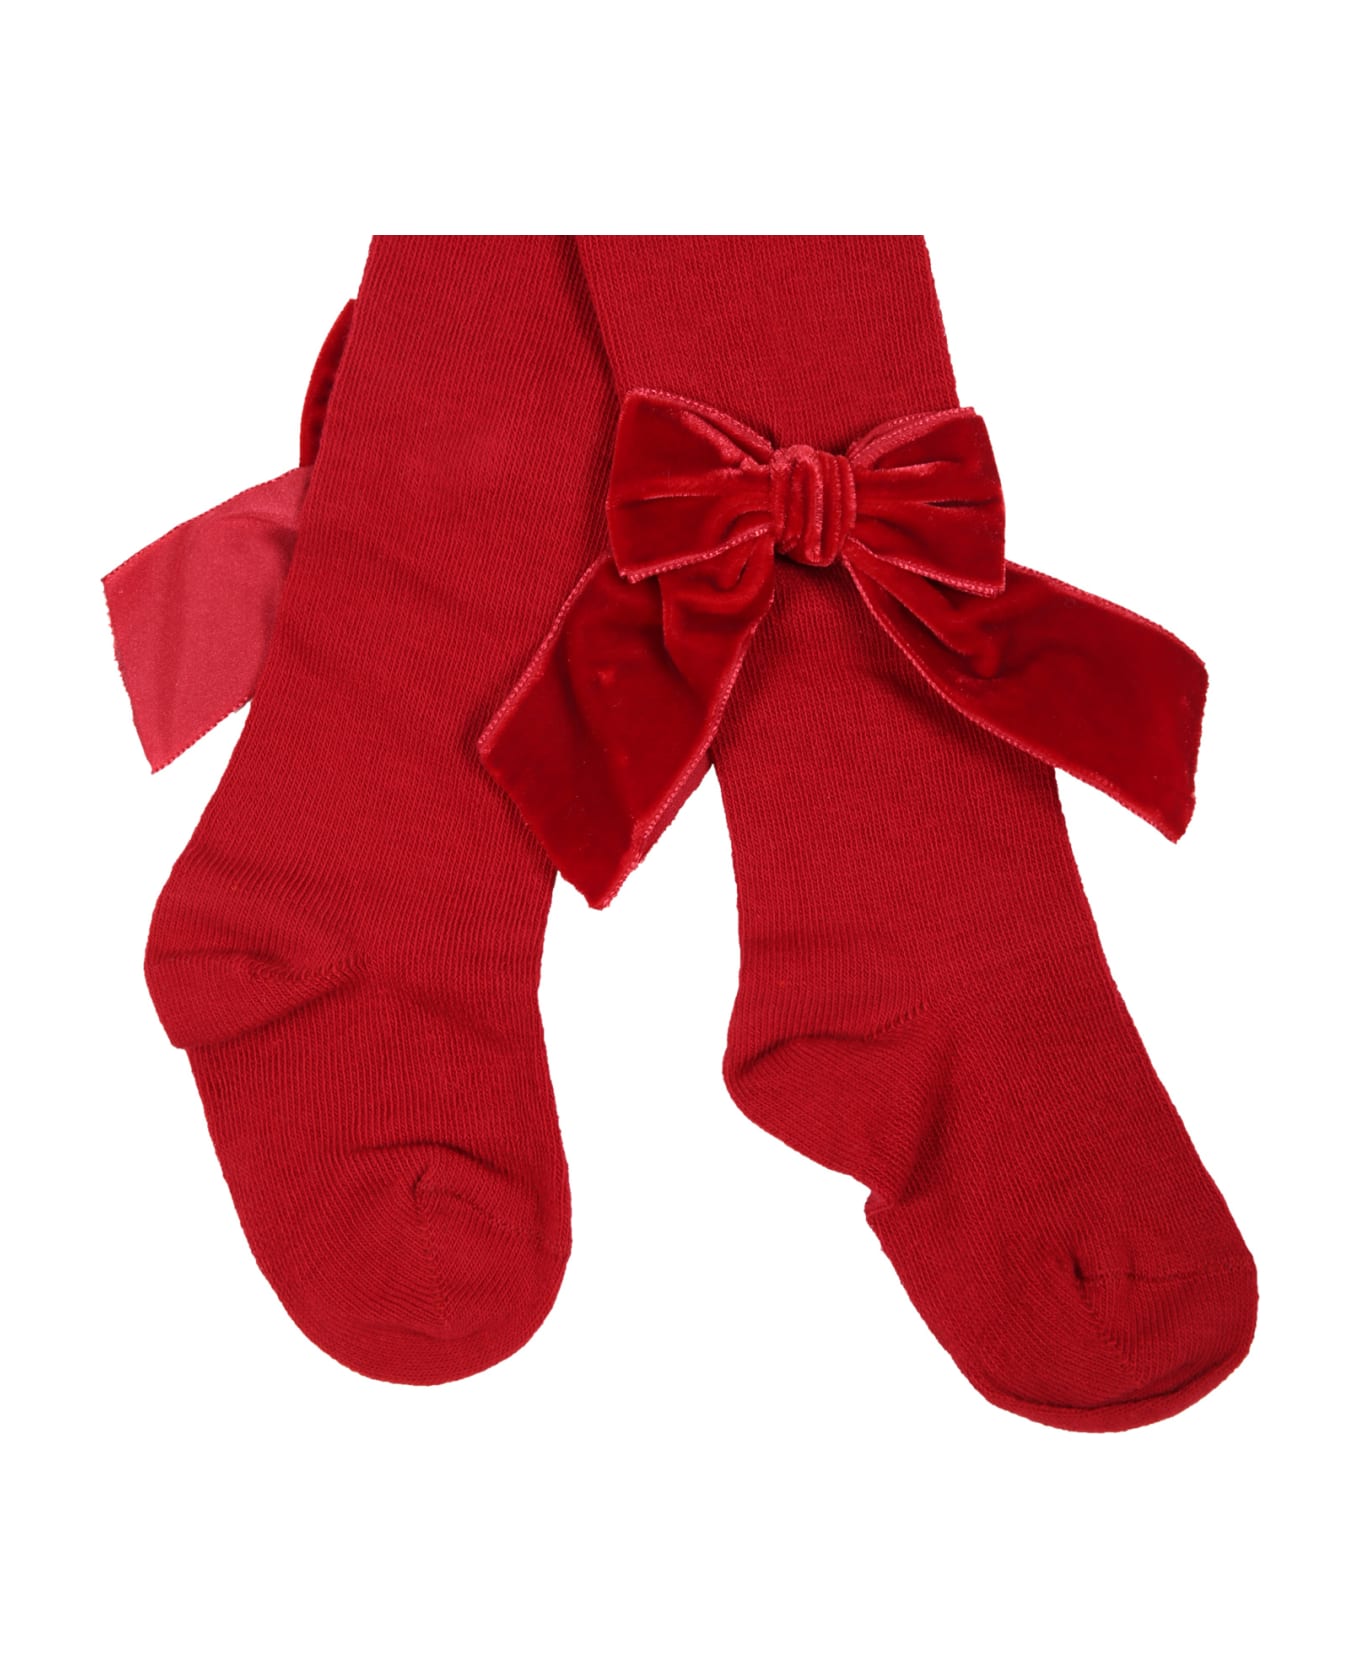 Story Loris Red Tights For Girl With Velvet Bows - Red アンダーウェア